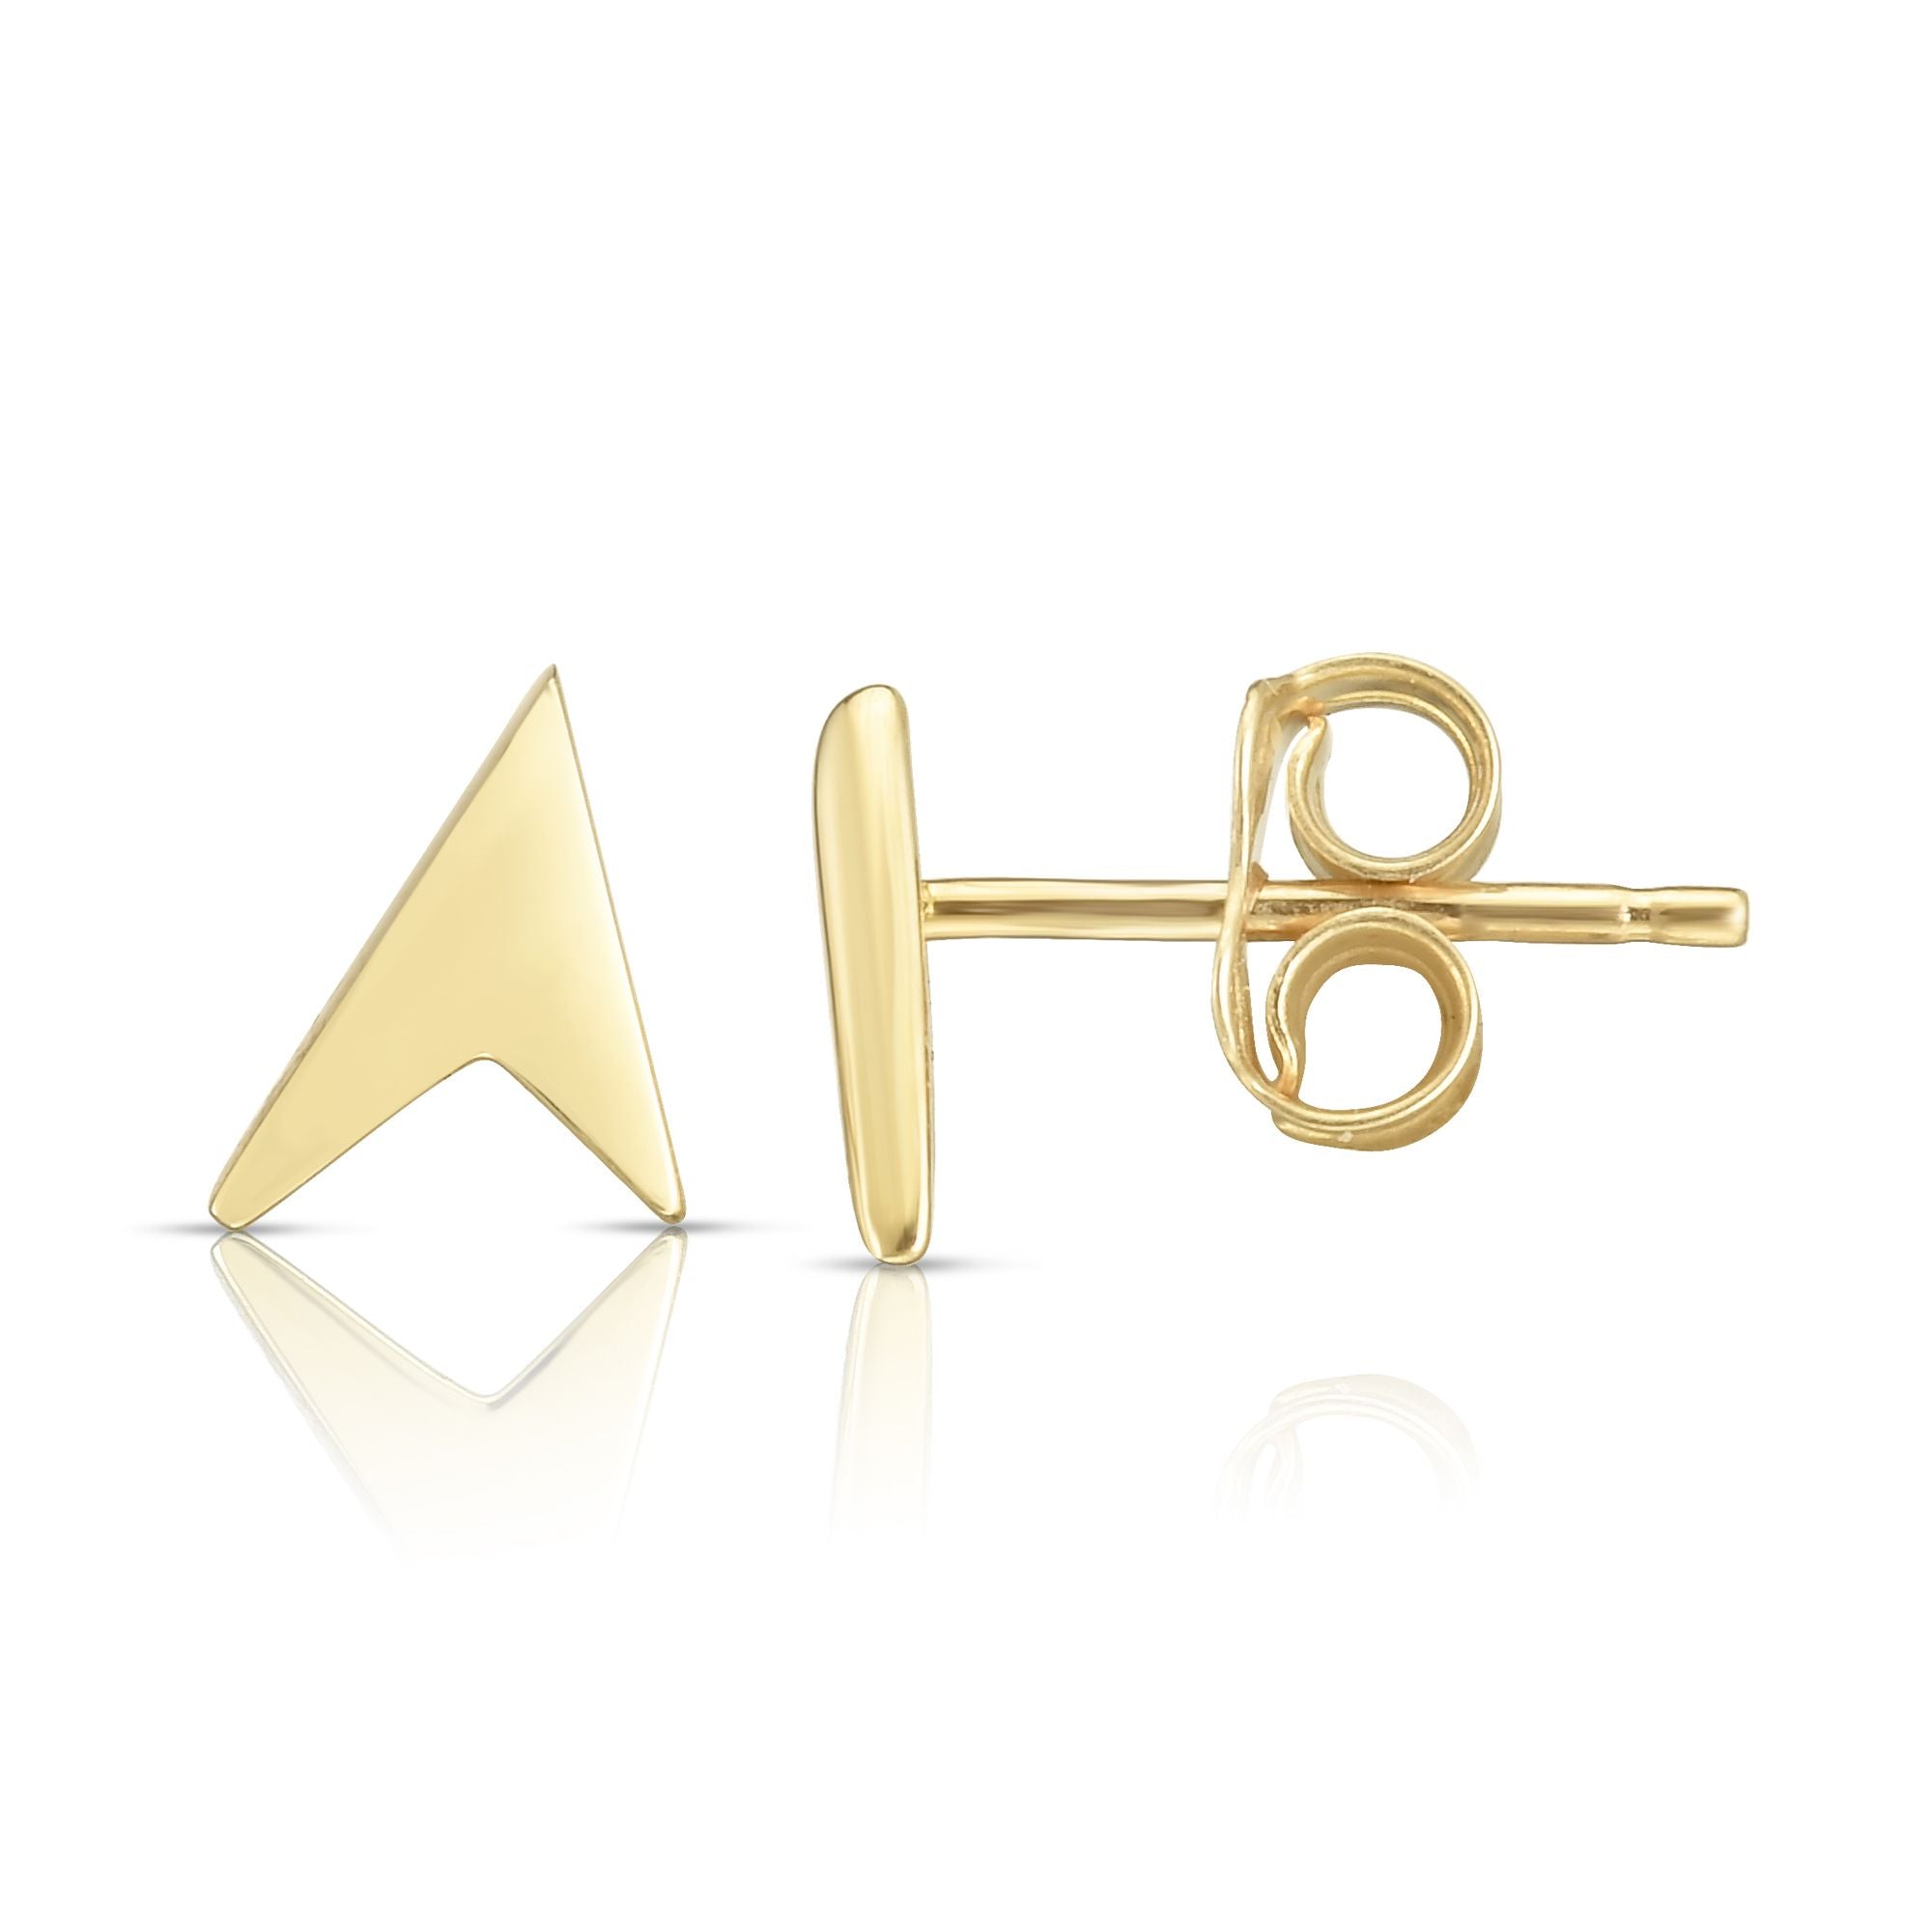 Minimalist Solid Gold Fancy Post Pointer Earrings with Push Back Clasp - wingroupjewelry